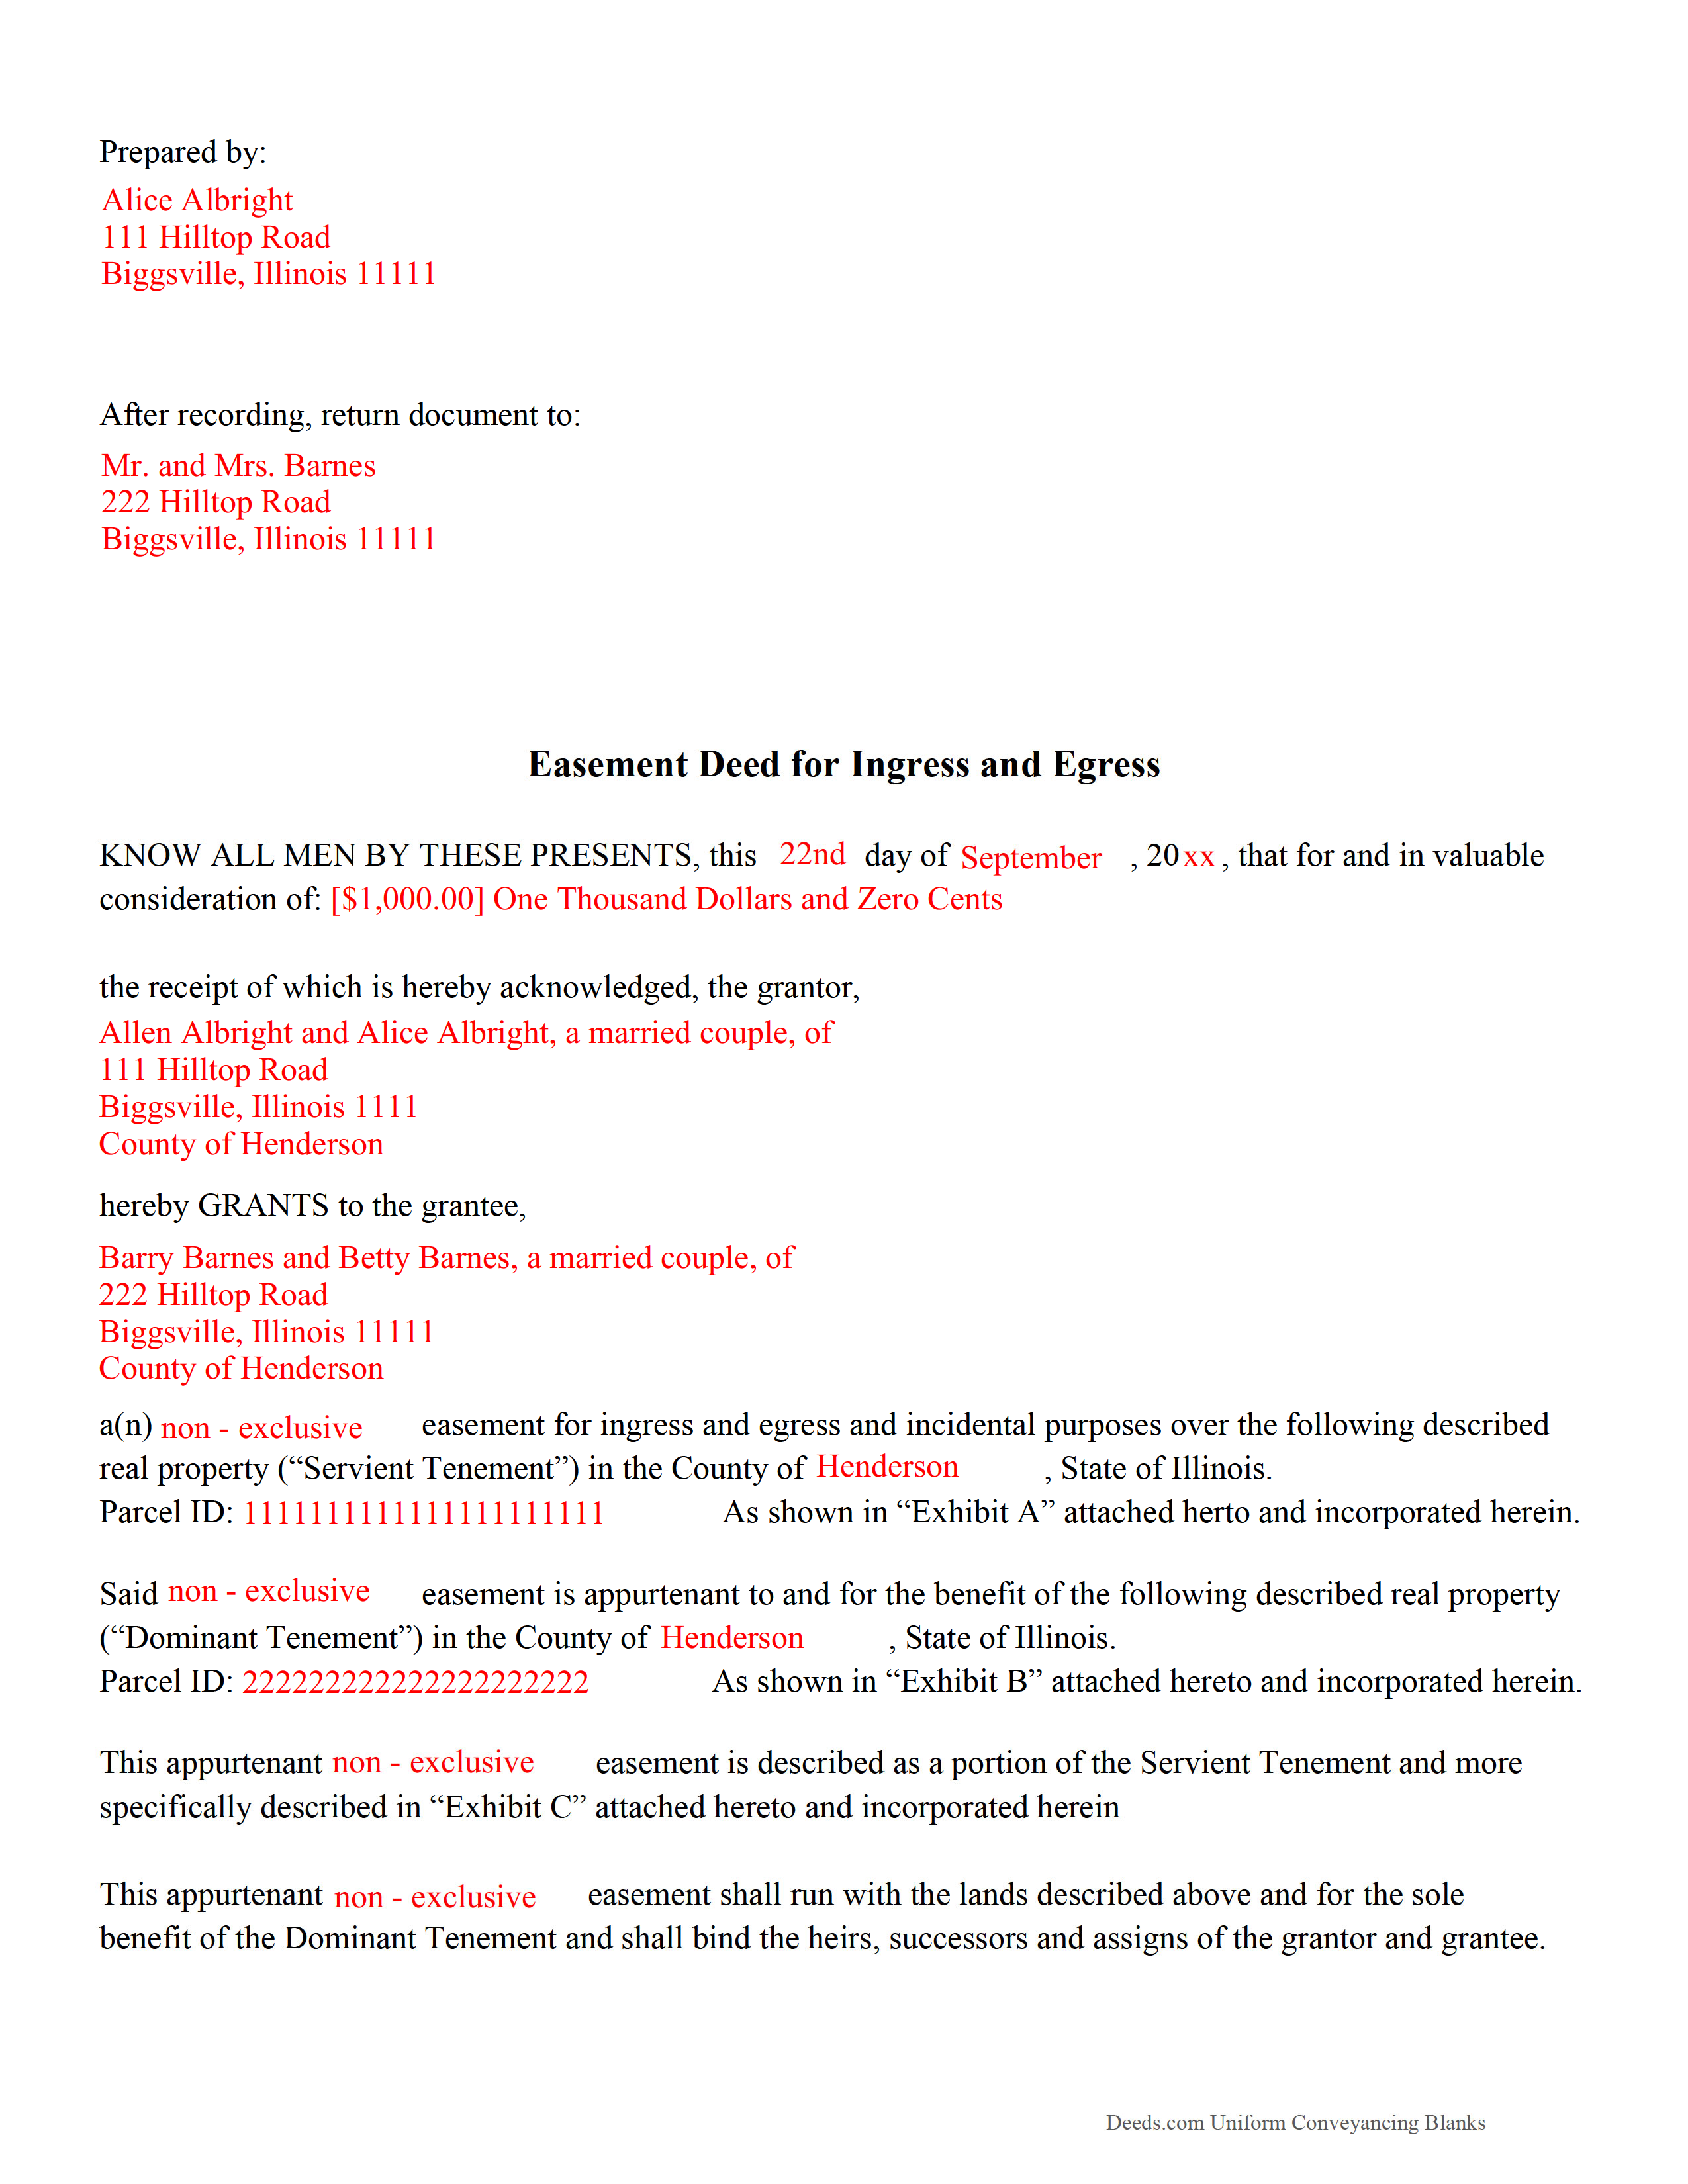 Completed Example of the Easement Deed Document